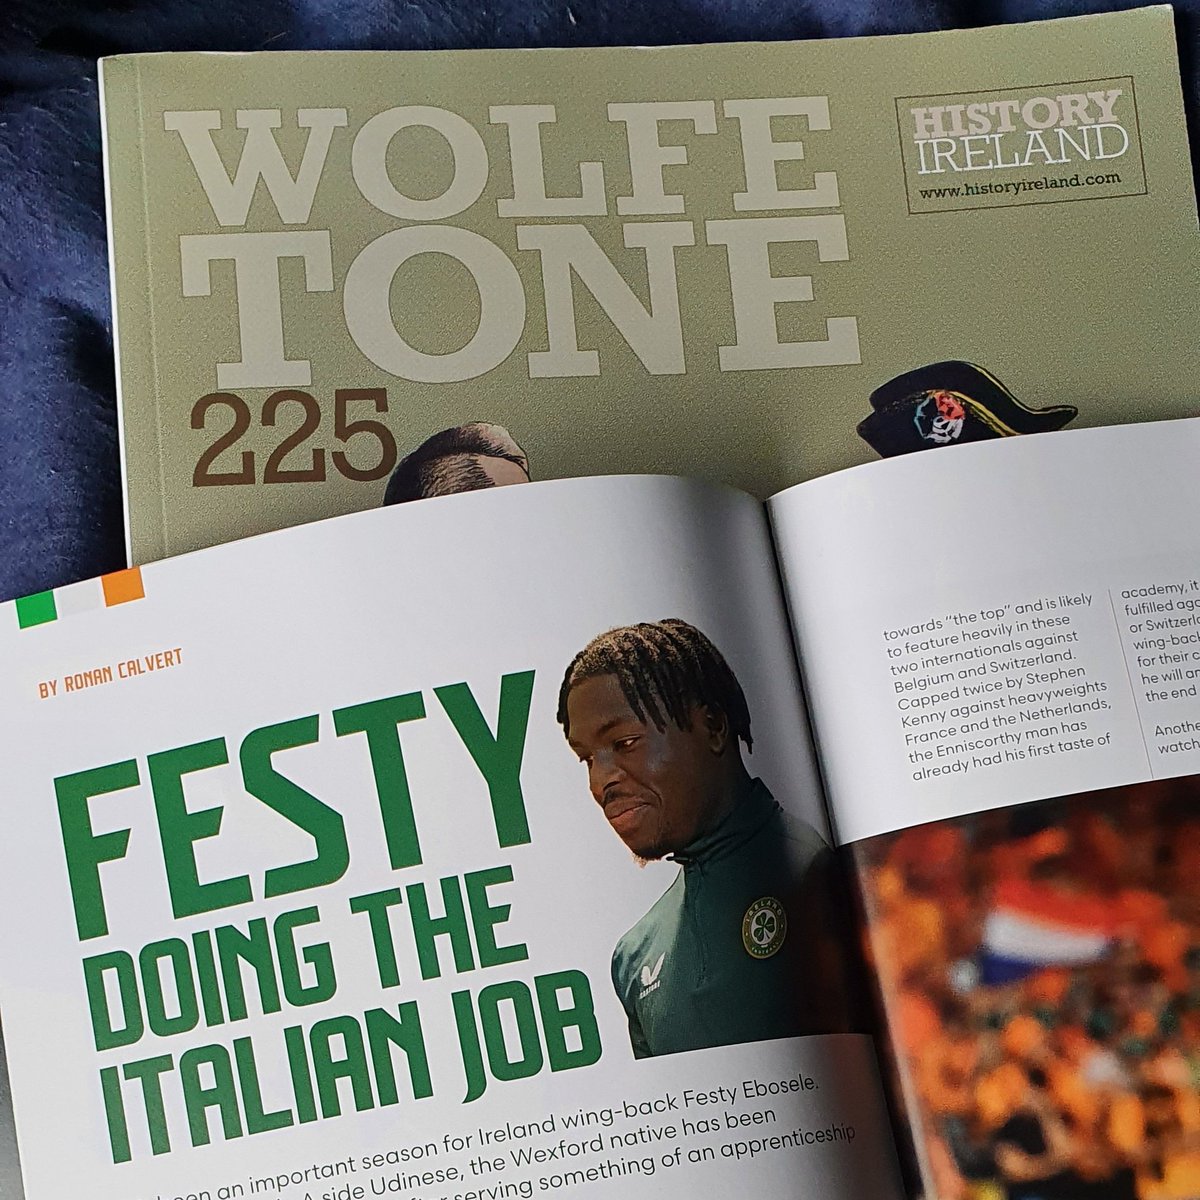 'Wolfe Tone and Festy Ebosele' Some publications in the post today are both are for work related things. @HistIreHedge Wolfe Tone 225 publication and @FAIreland recent match programme for Ireland v Belgium. I just hope I don't get things mixed up in work.